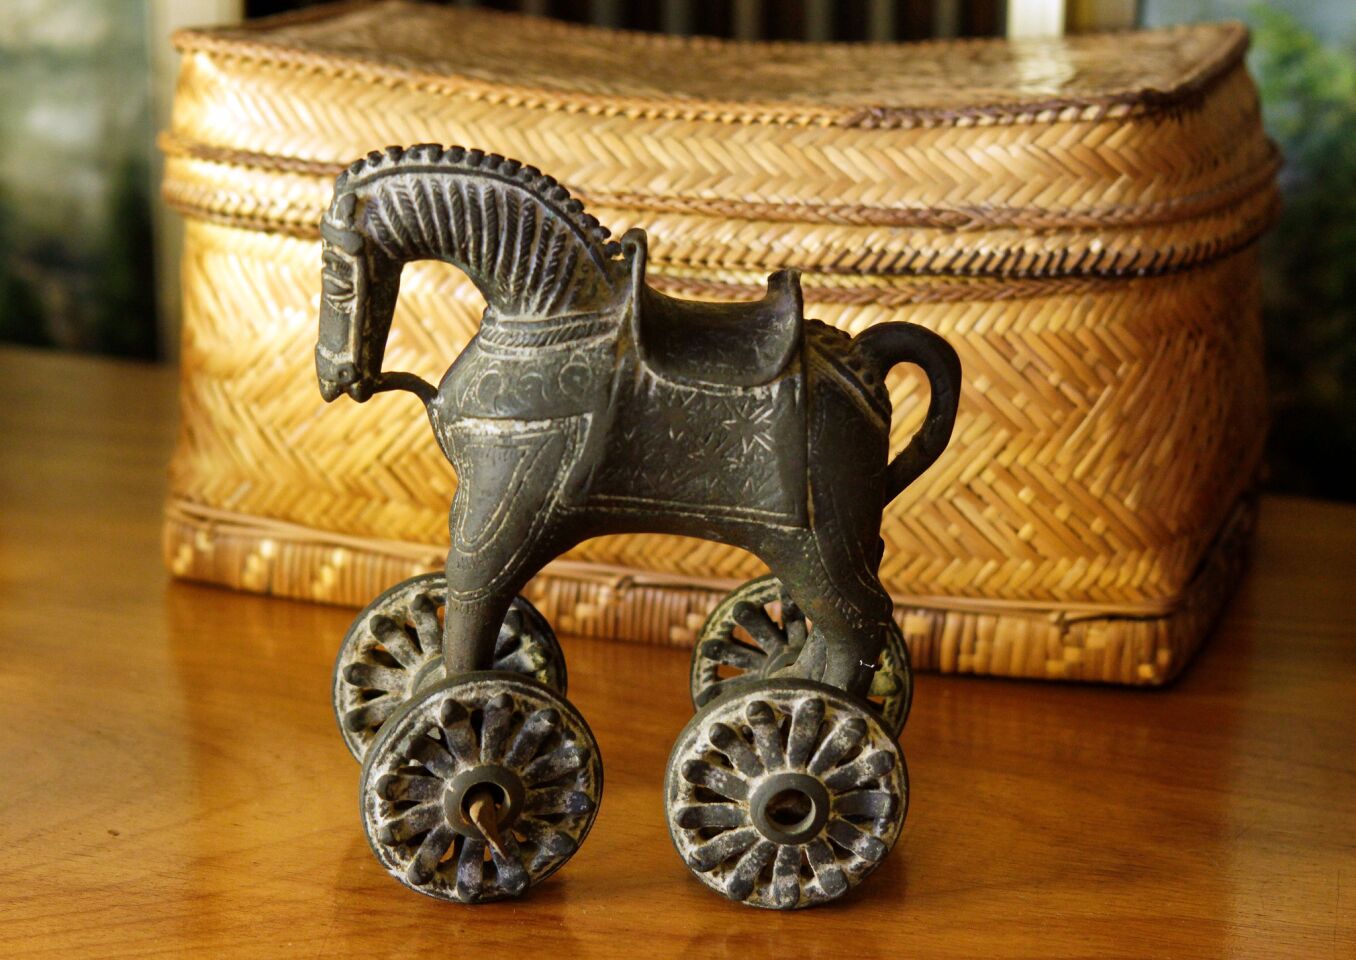 A toy horse on wheels from India and a pillow-shaped basket, possibly from China.